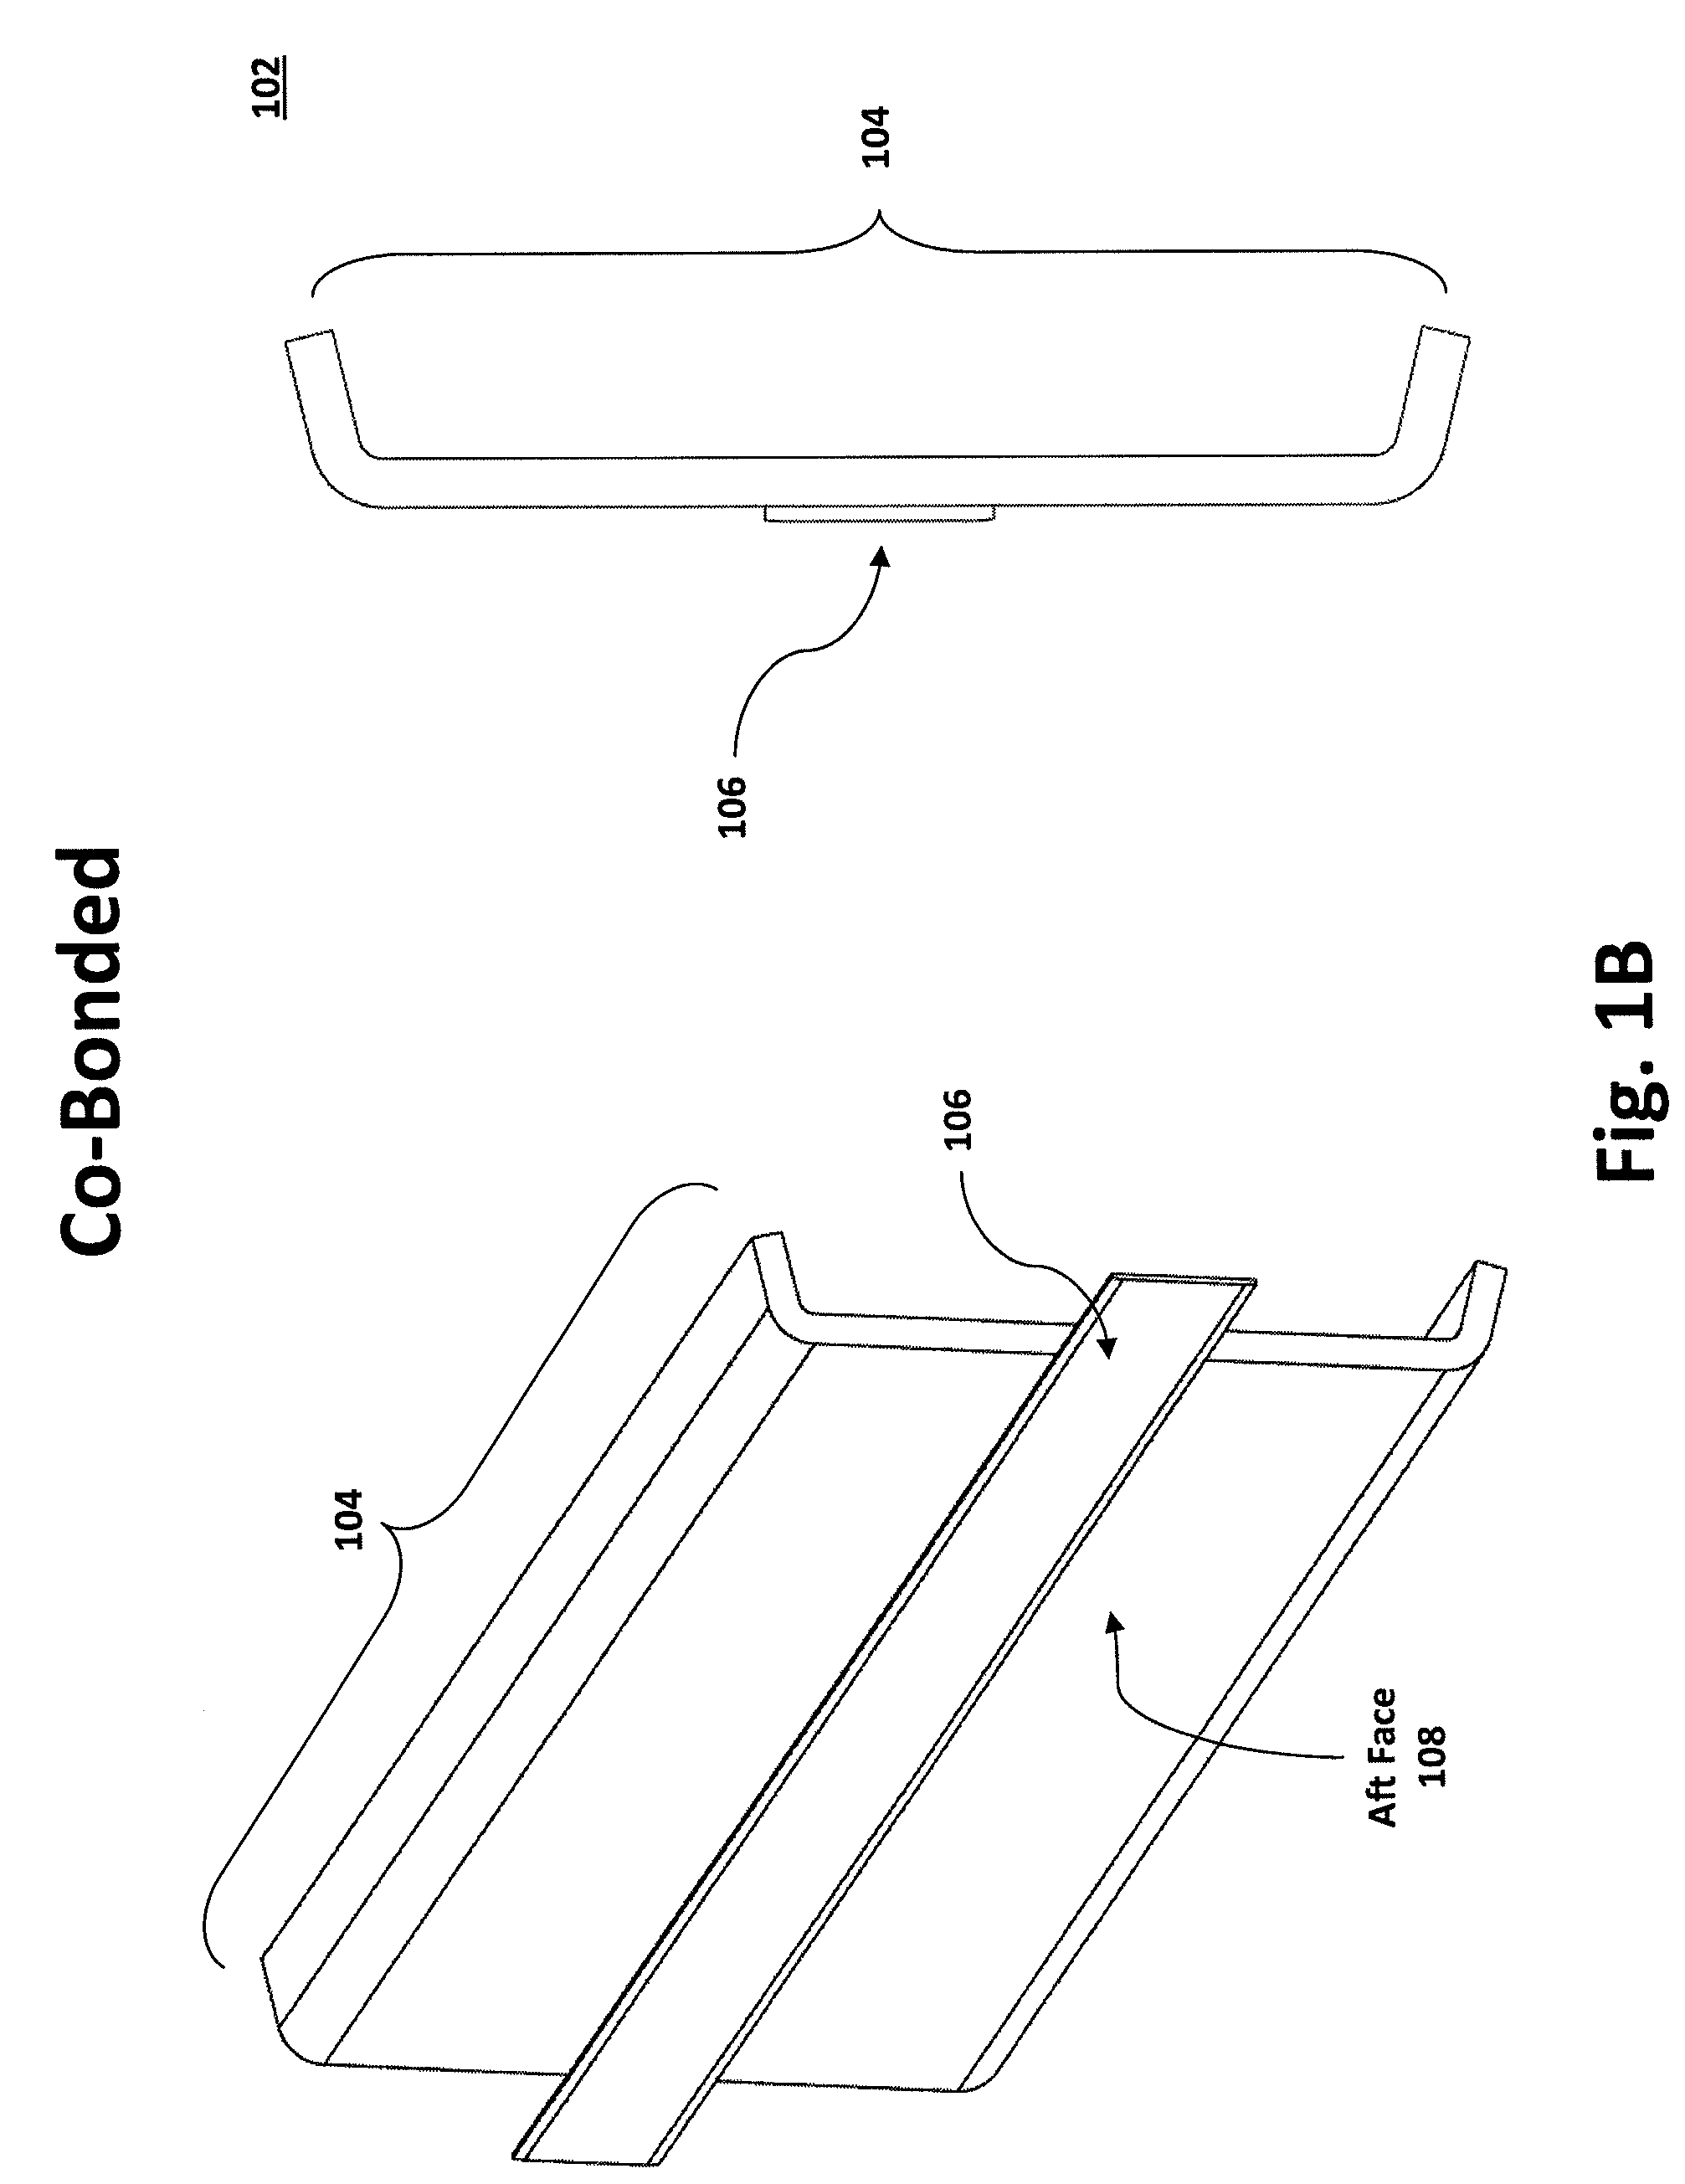 Apparatus and method for an aircraft conductor sandwich assembly embedded to an aircraft structure